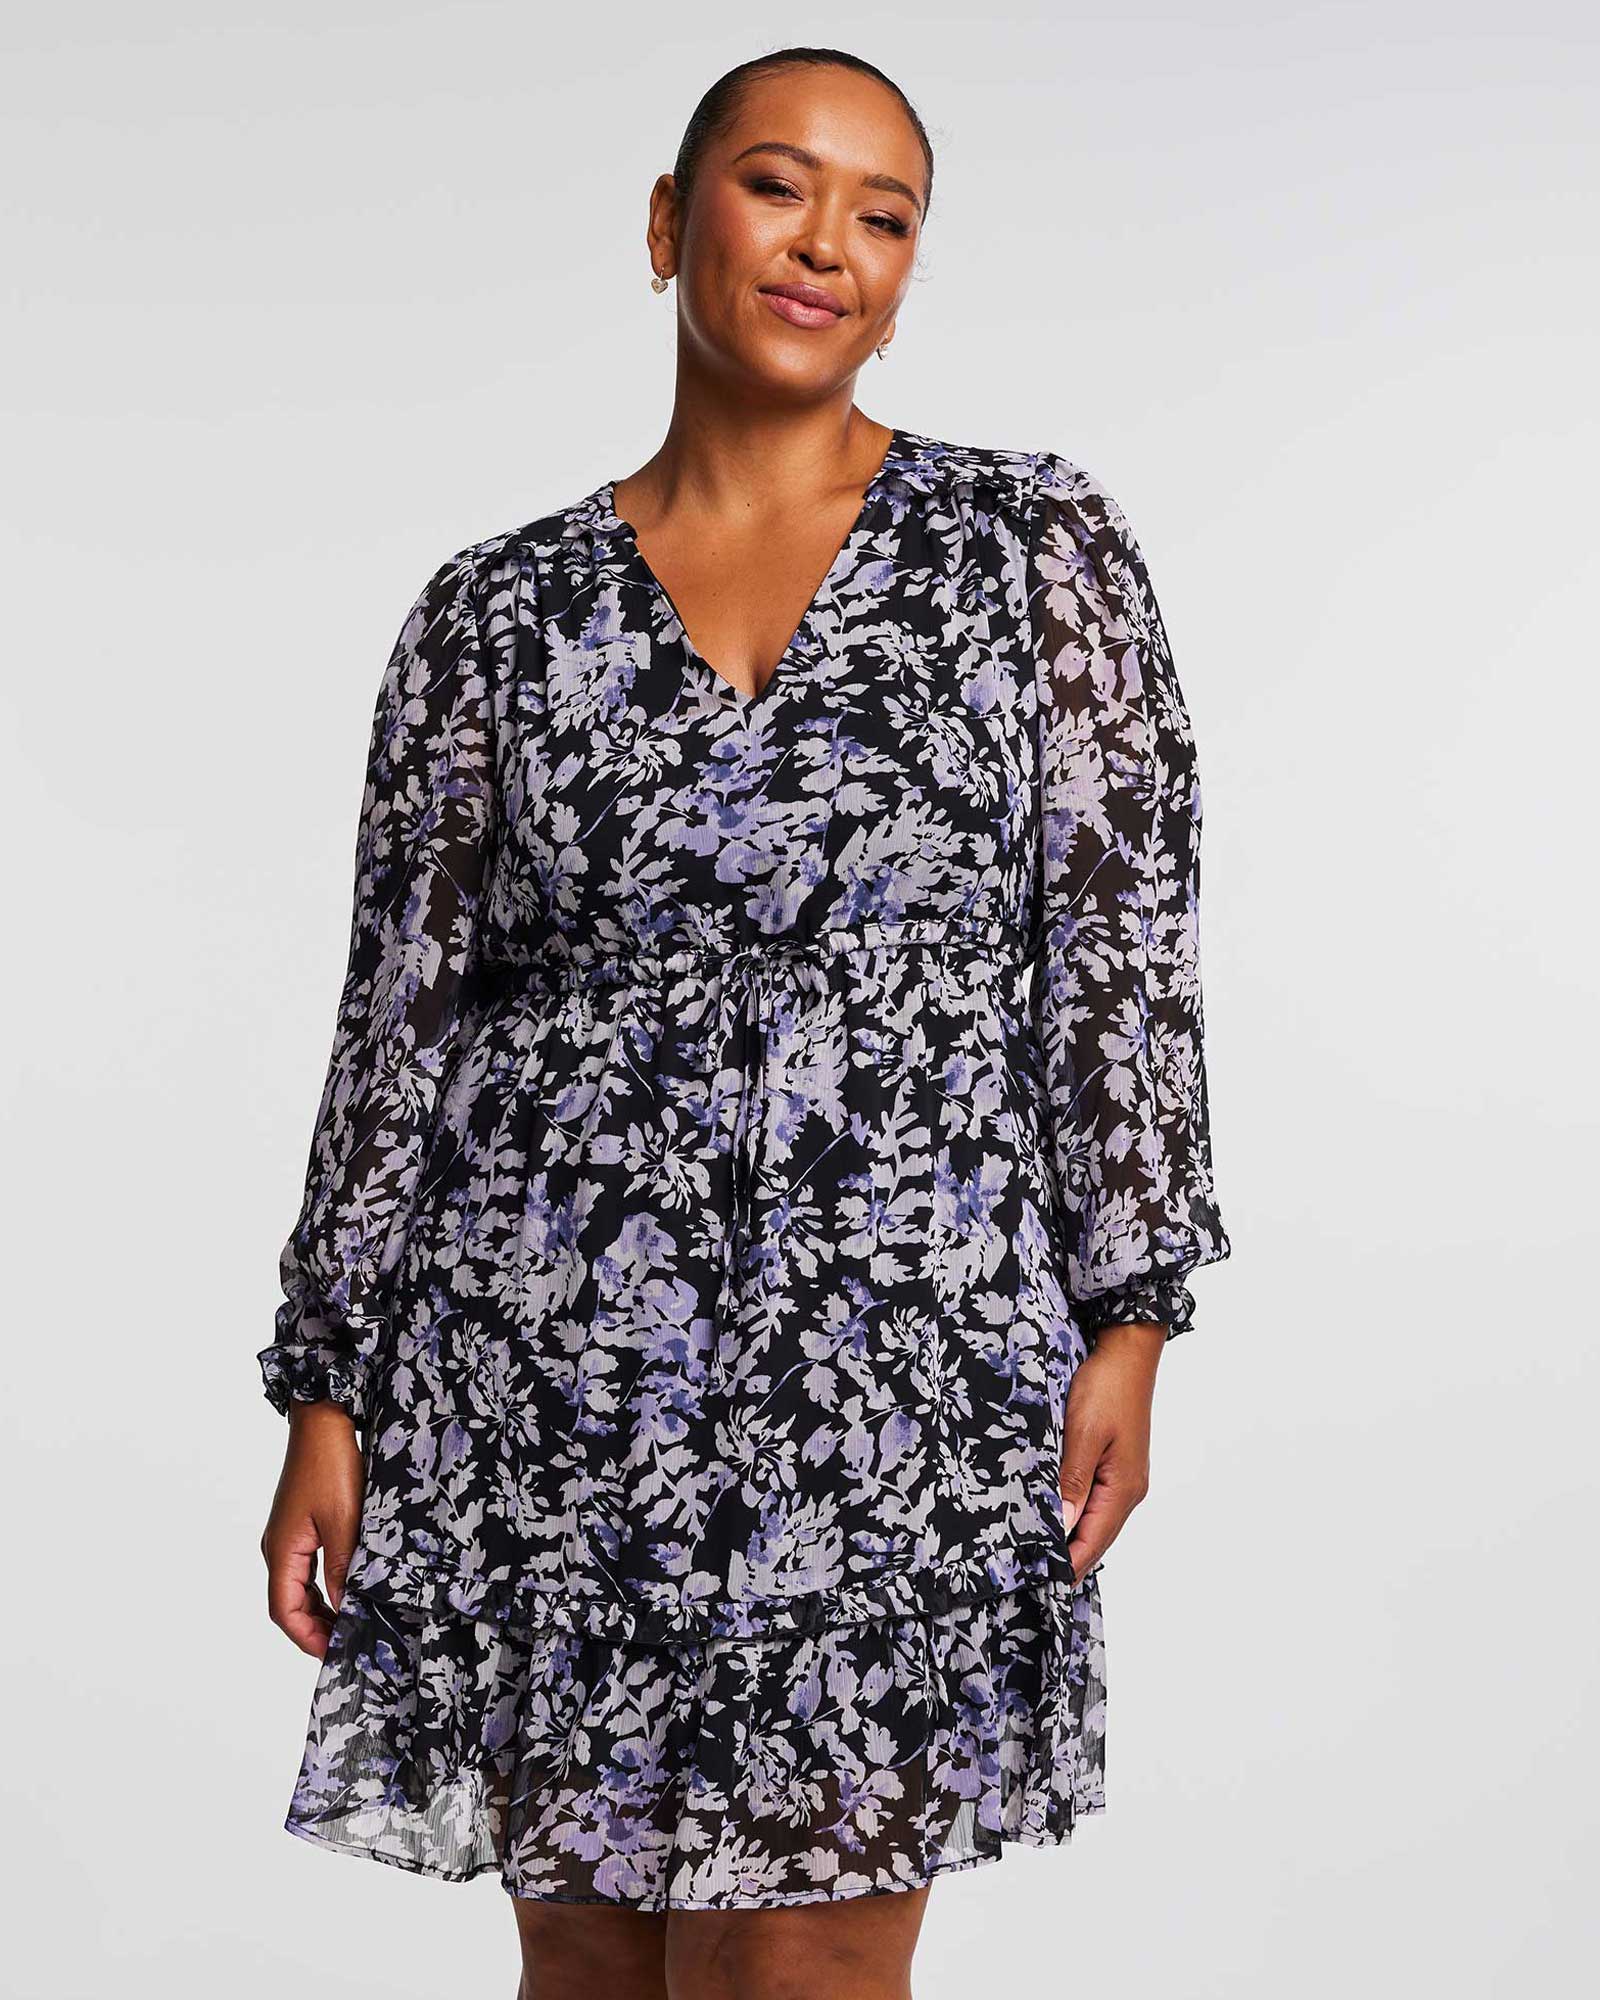 A plus size woman wearing Estelle's Wild Orchid Long Sleeved Floral Dress.